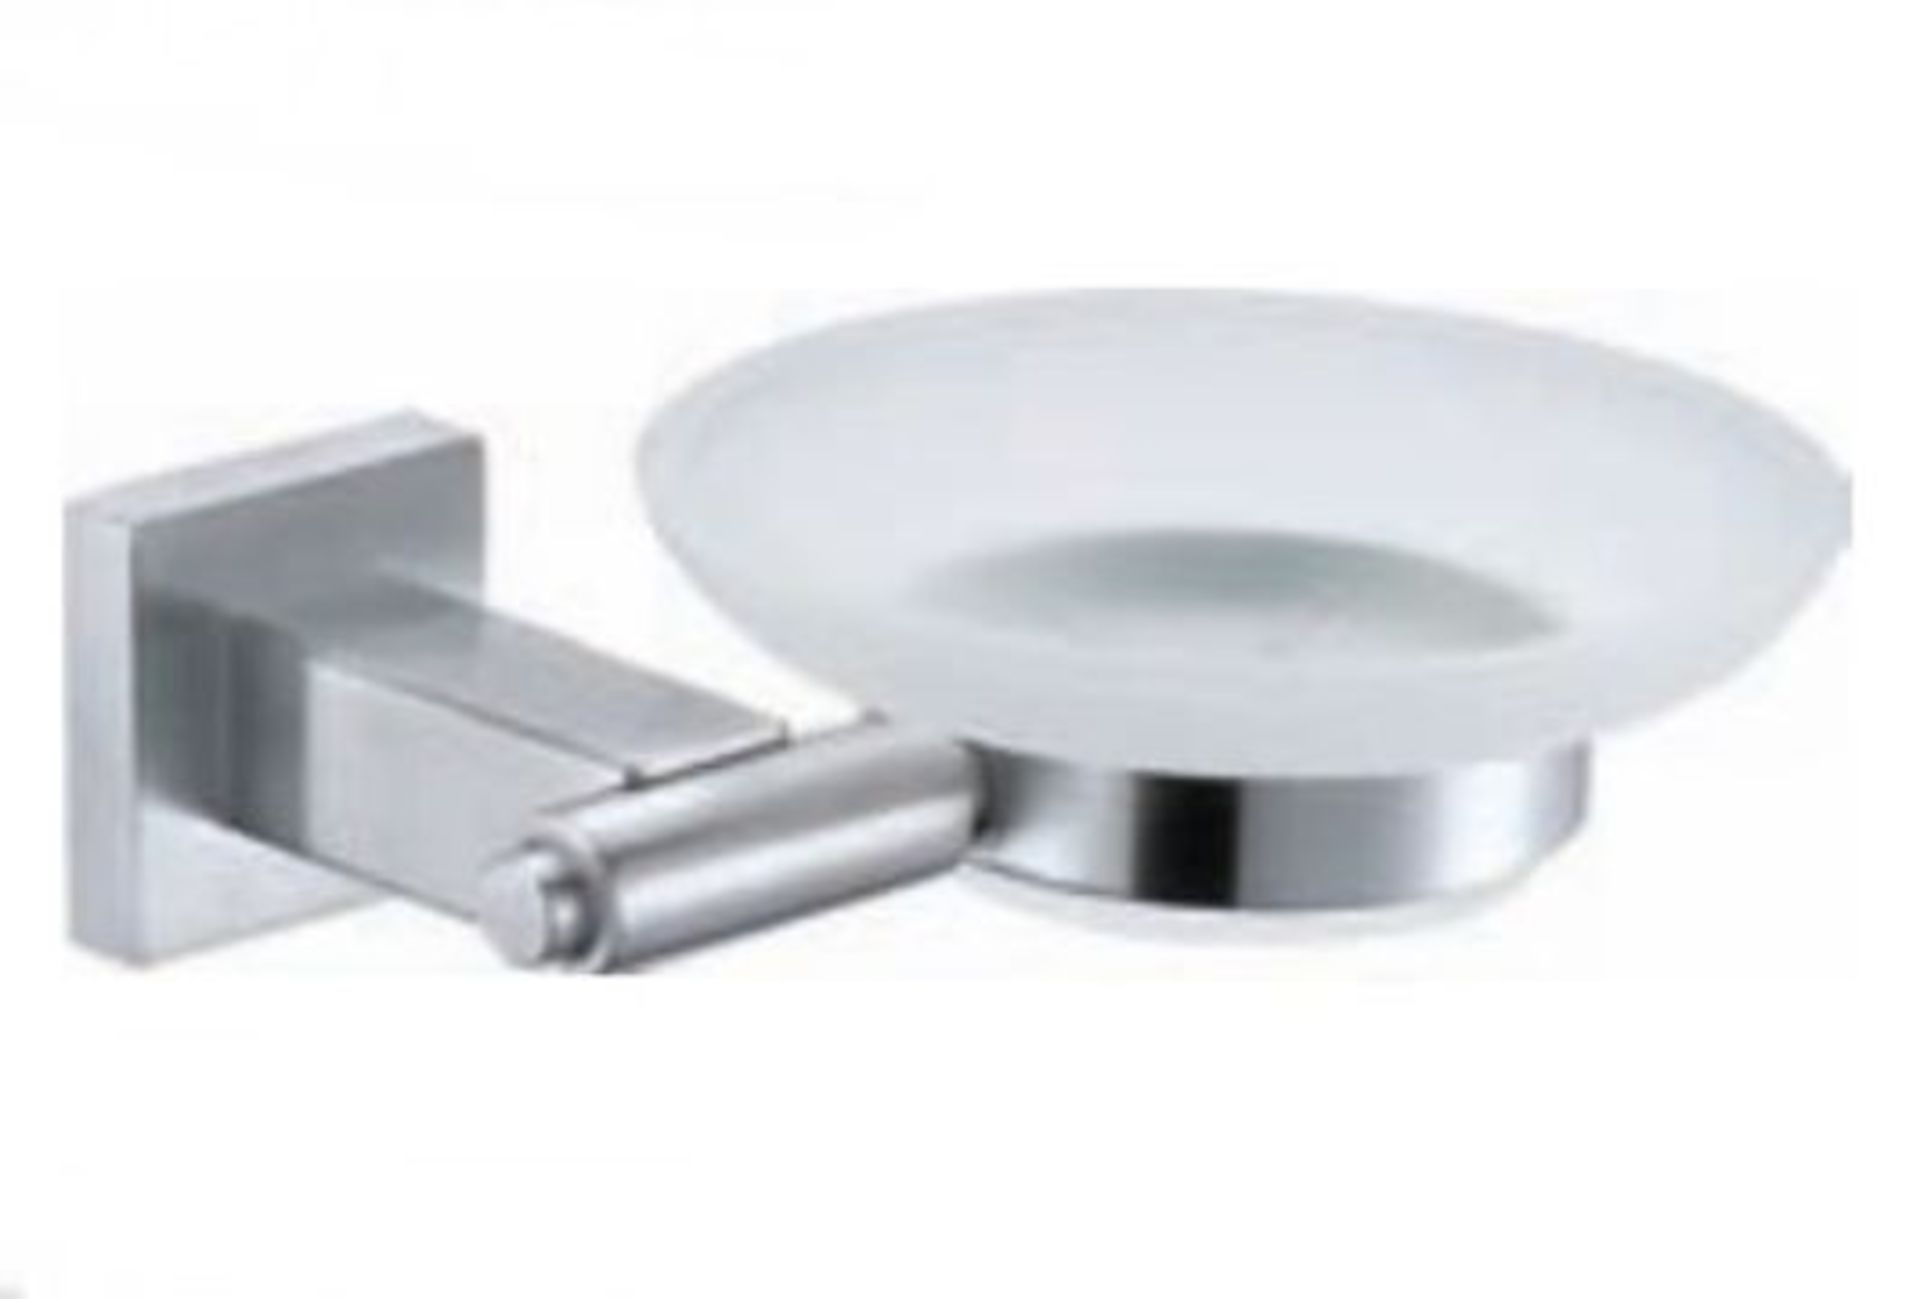 1 x Stonearth Soap Dish Holder With Frosted Glass - Solid Stainless Steel Bathroom Accessory - Brand